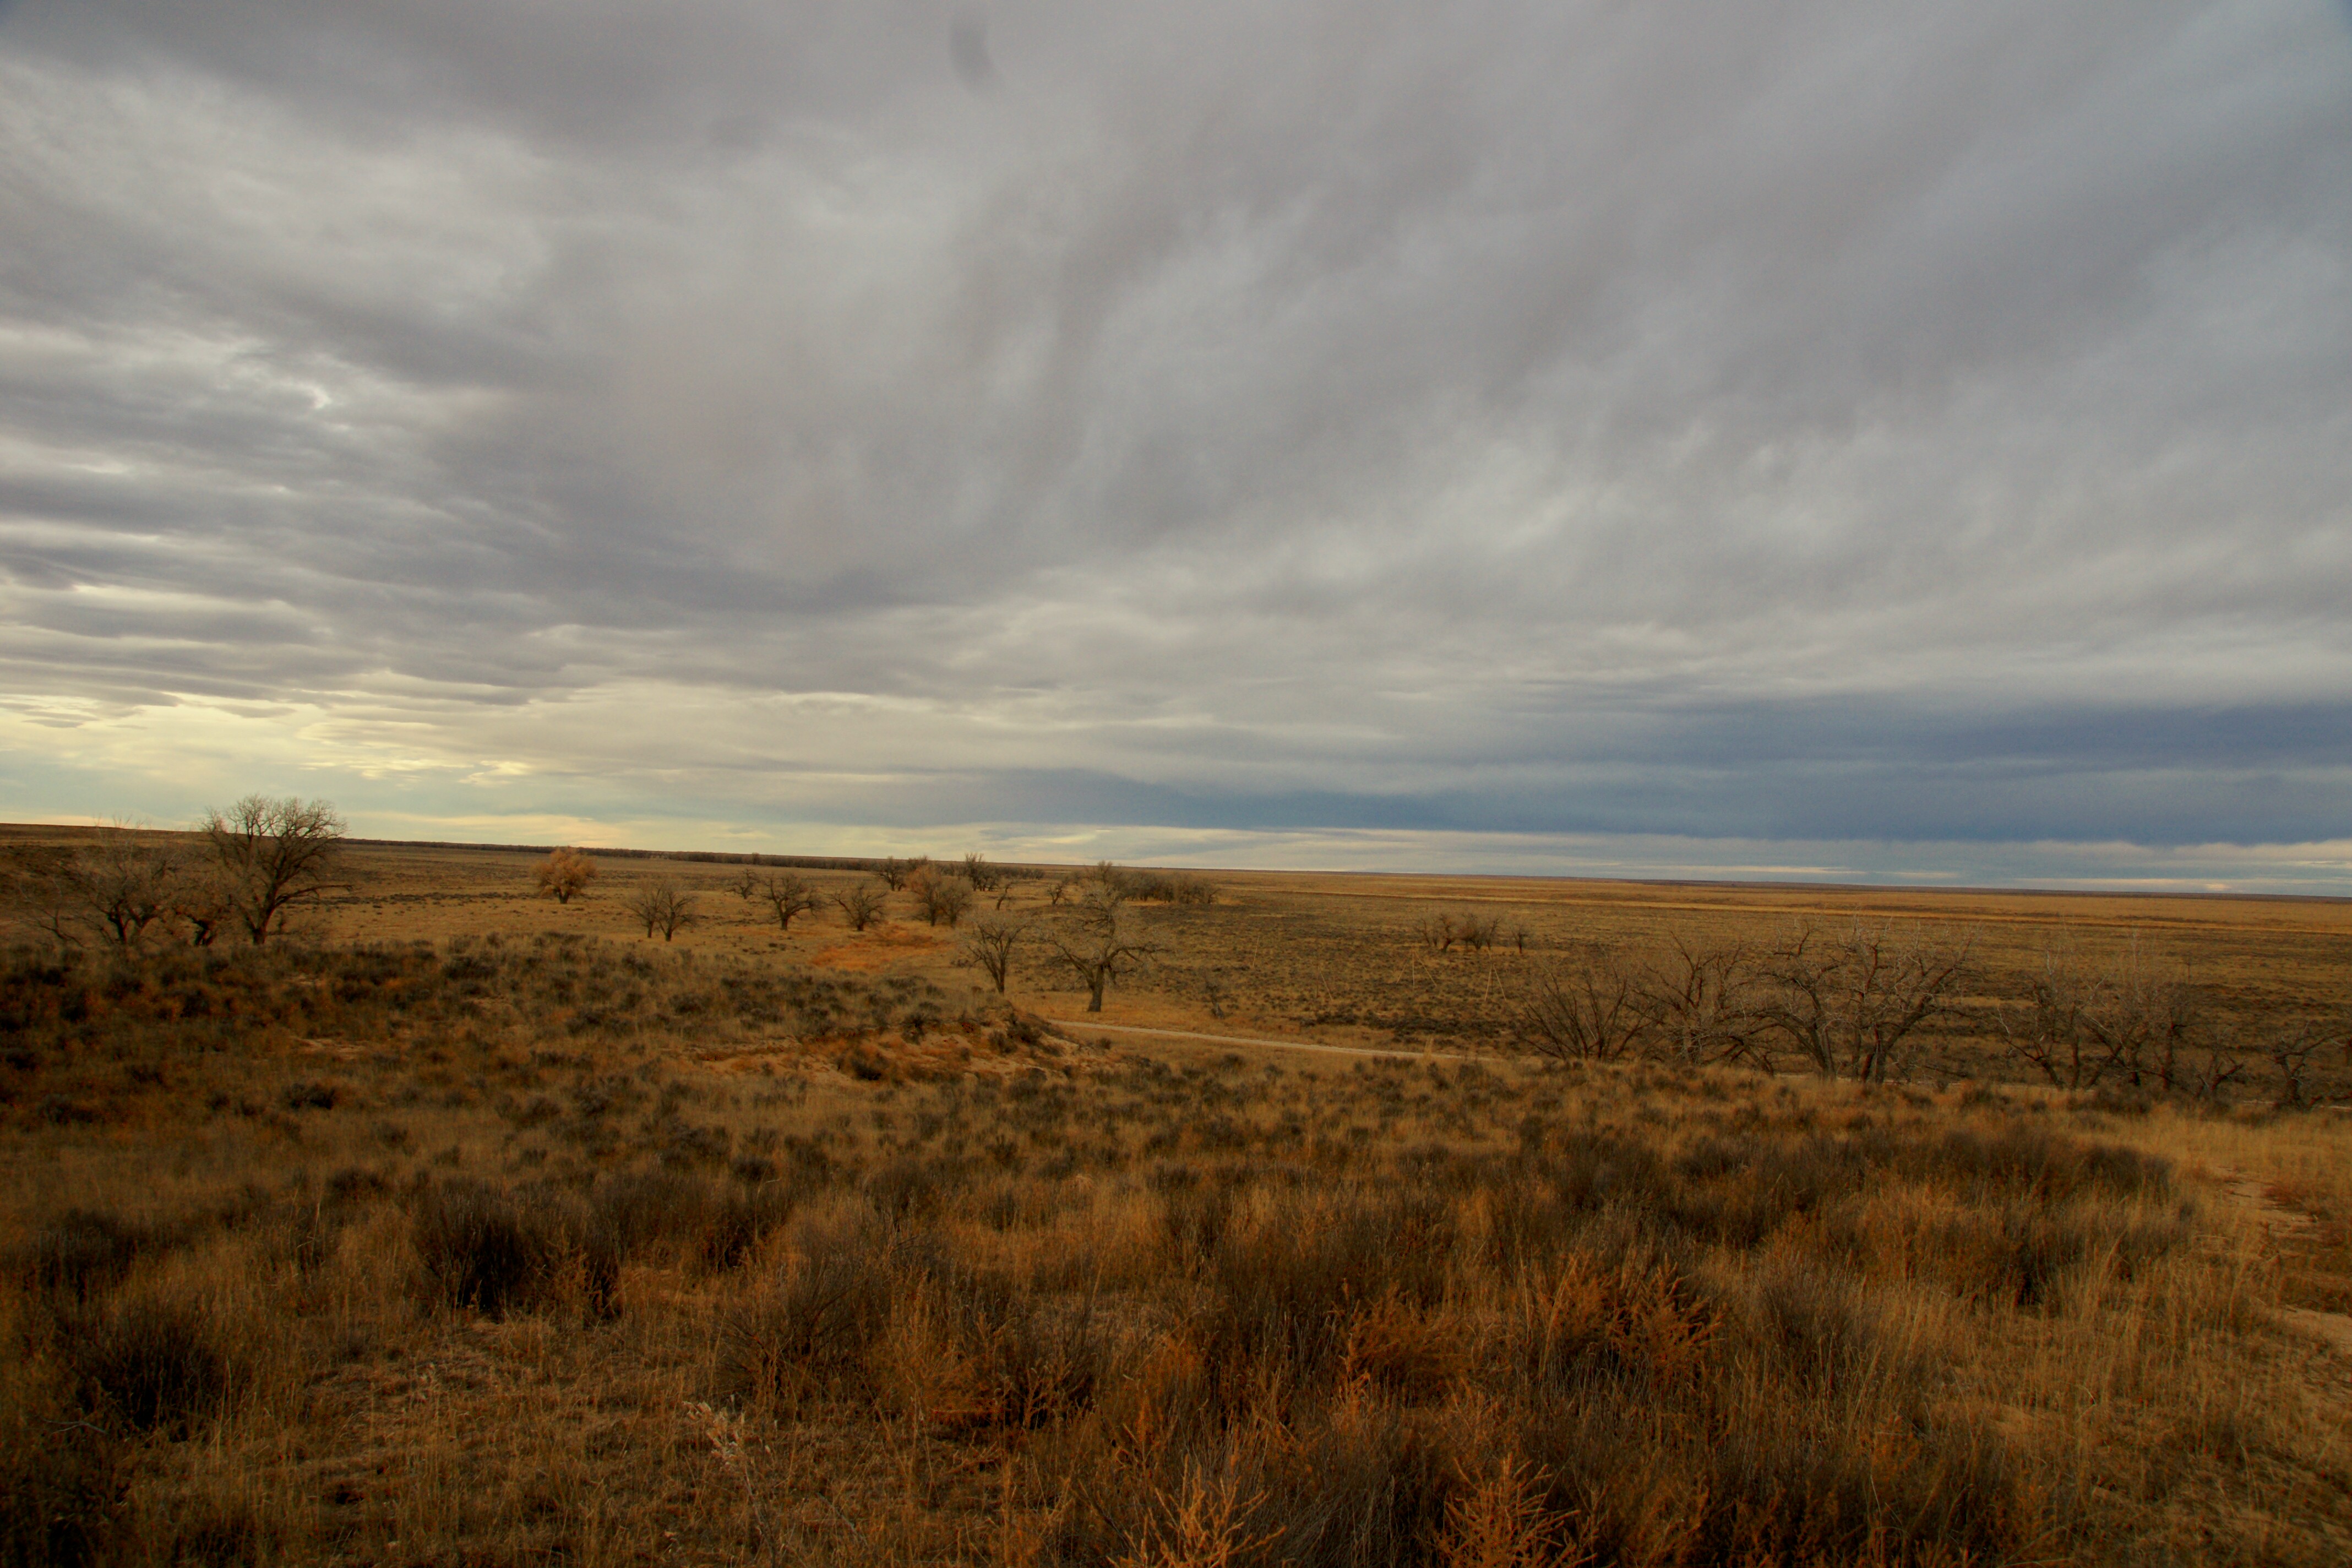 An expanse of winter prairie with brown grasses, leafless trees, and low clouds above.